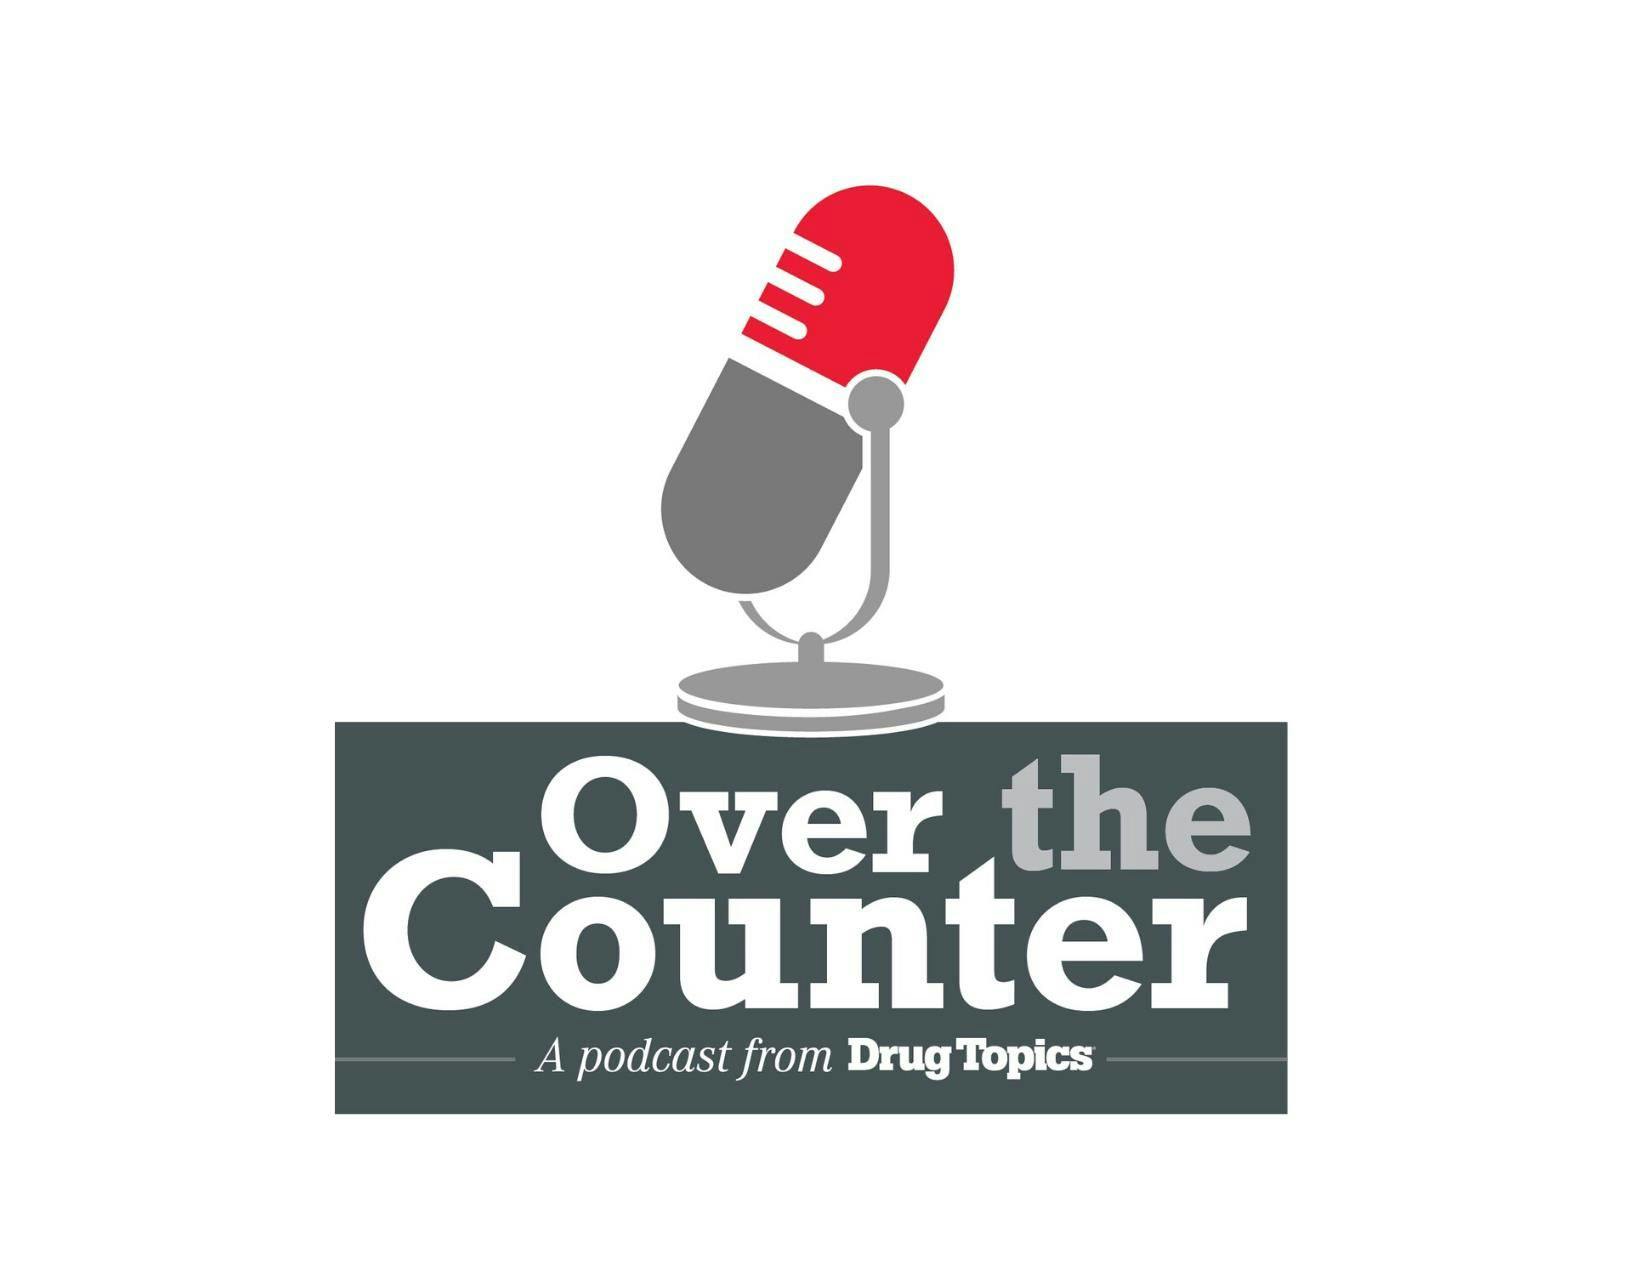 Over the Counter Drug Topics Podcast